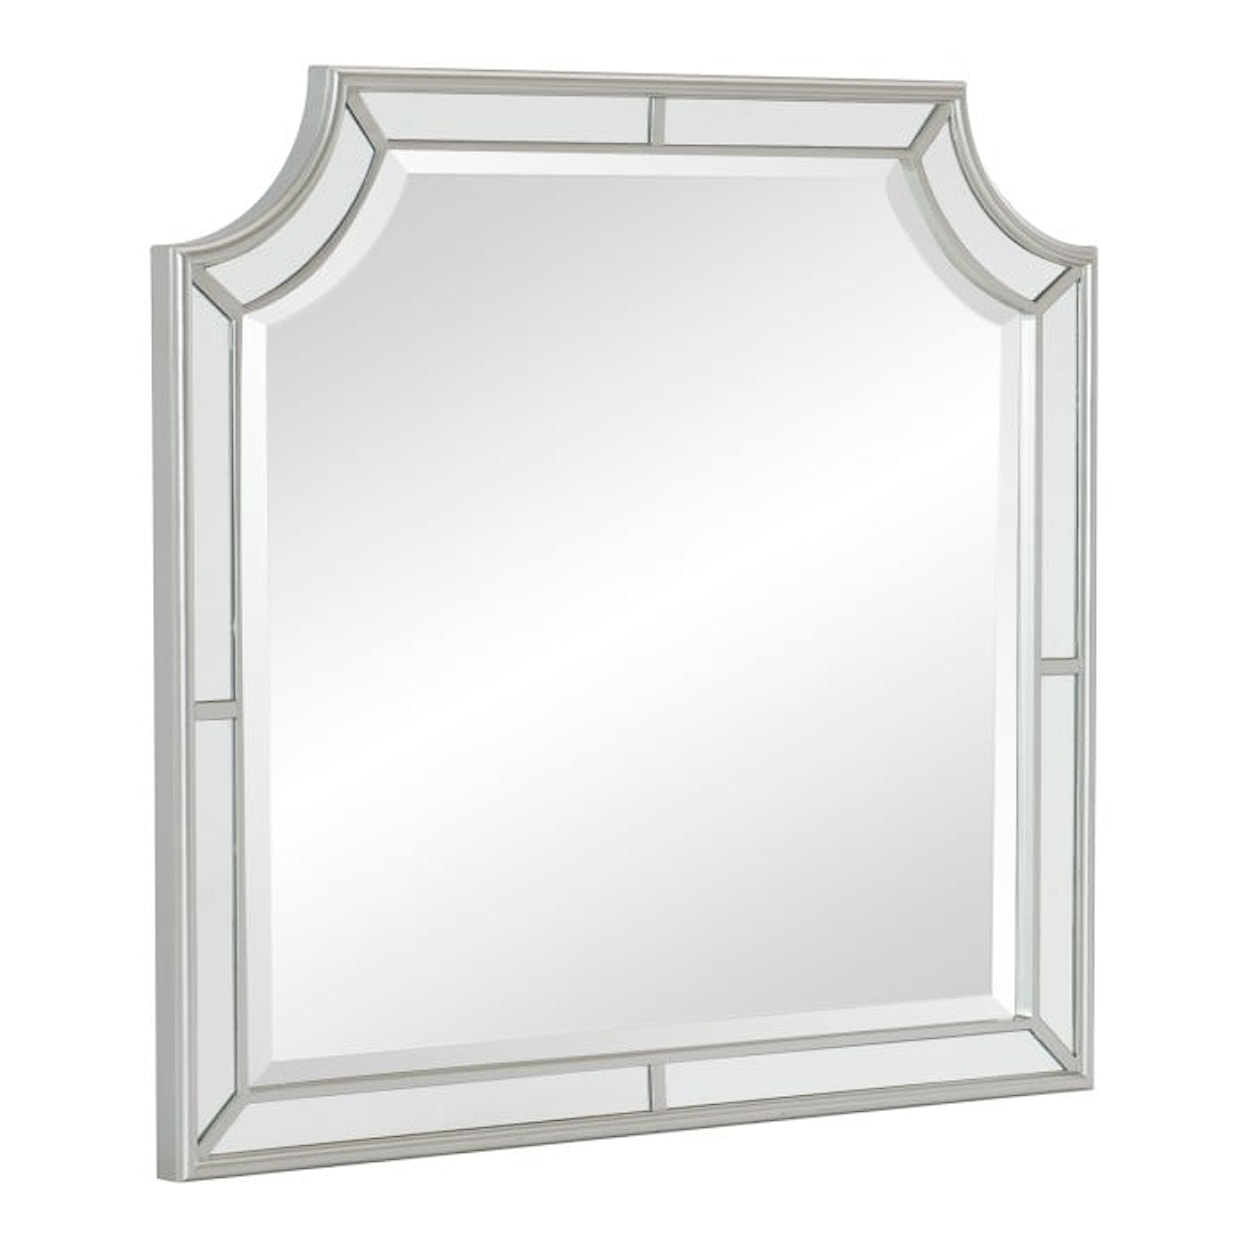 Homelegance Avondale Arched Mirror with Beveled Mirror Trim